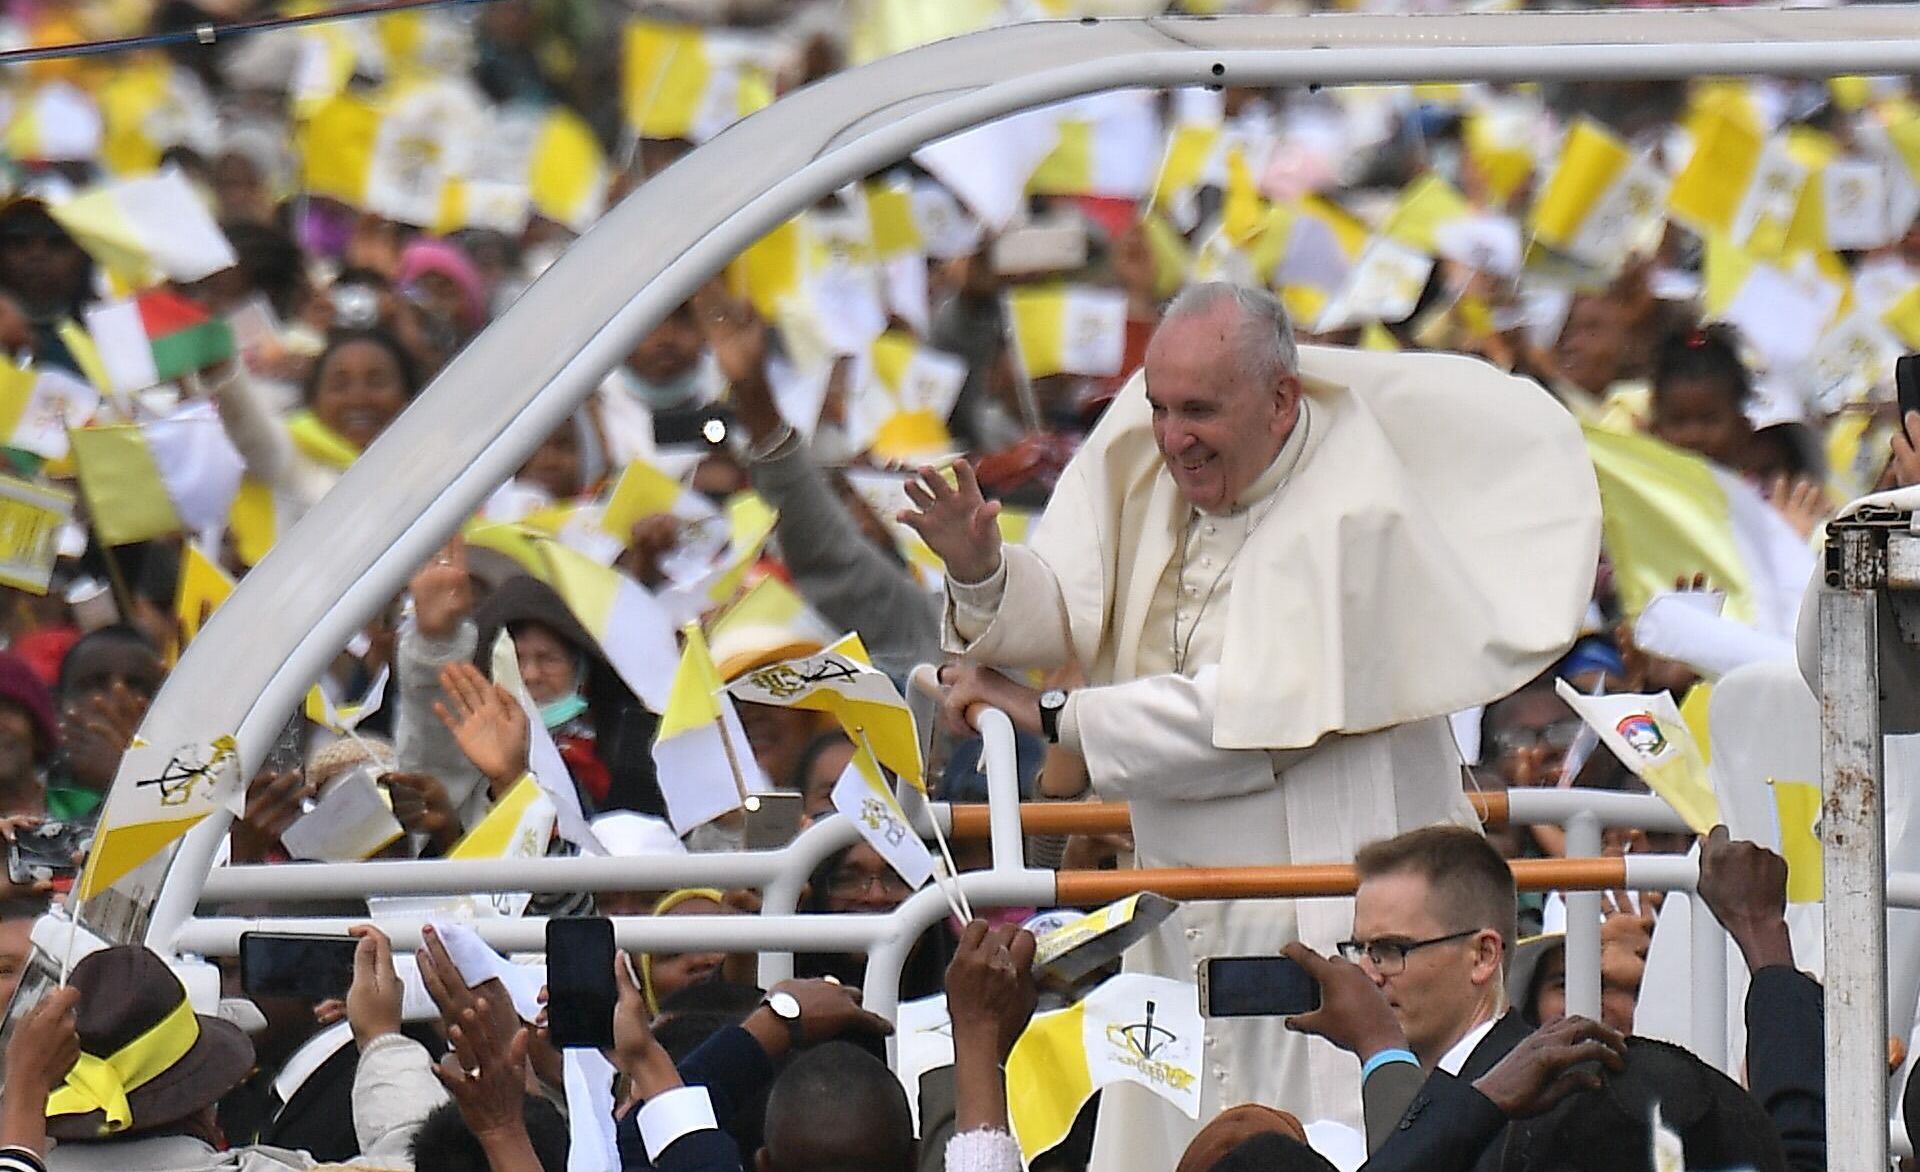 epa07827272 Pope Francis (C) arrives to lead the Holy mass on the diocesan grounds of Soamandrakizay in Antananarivo, Madagascar, 08 September 2019. Pope Francis will visit Mozambique, Madagascar, Mauritius on his three-nation trip to Africa, from 04 to 10 September 2019.  EPA/LUCA ZENNARO